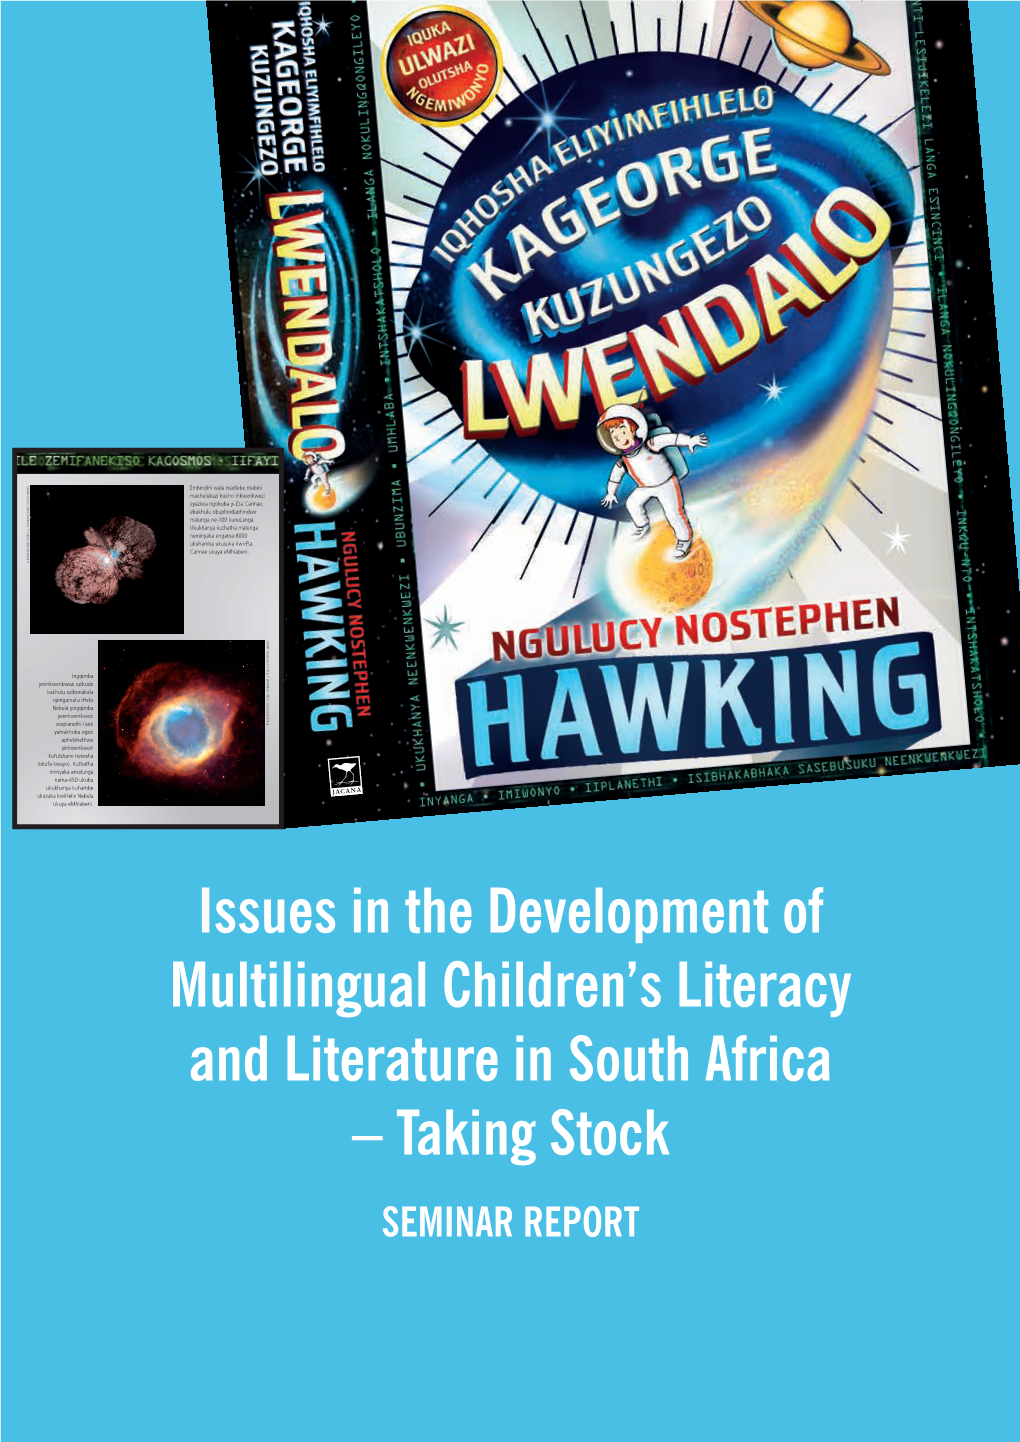 Issues in the Development of Multilingual Children's Literacy and Literature in South Africa – Taking Stock